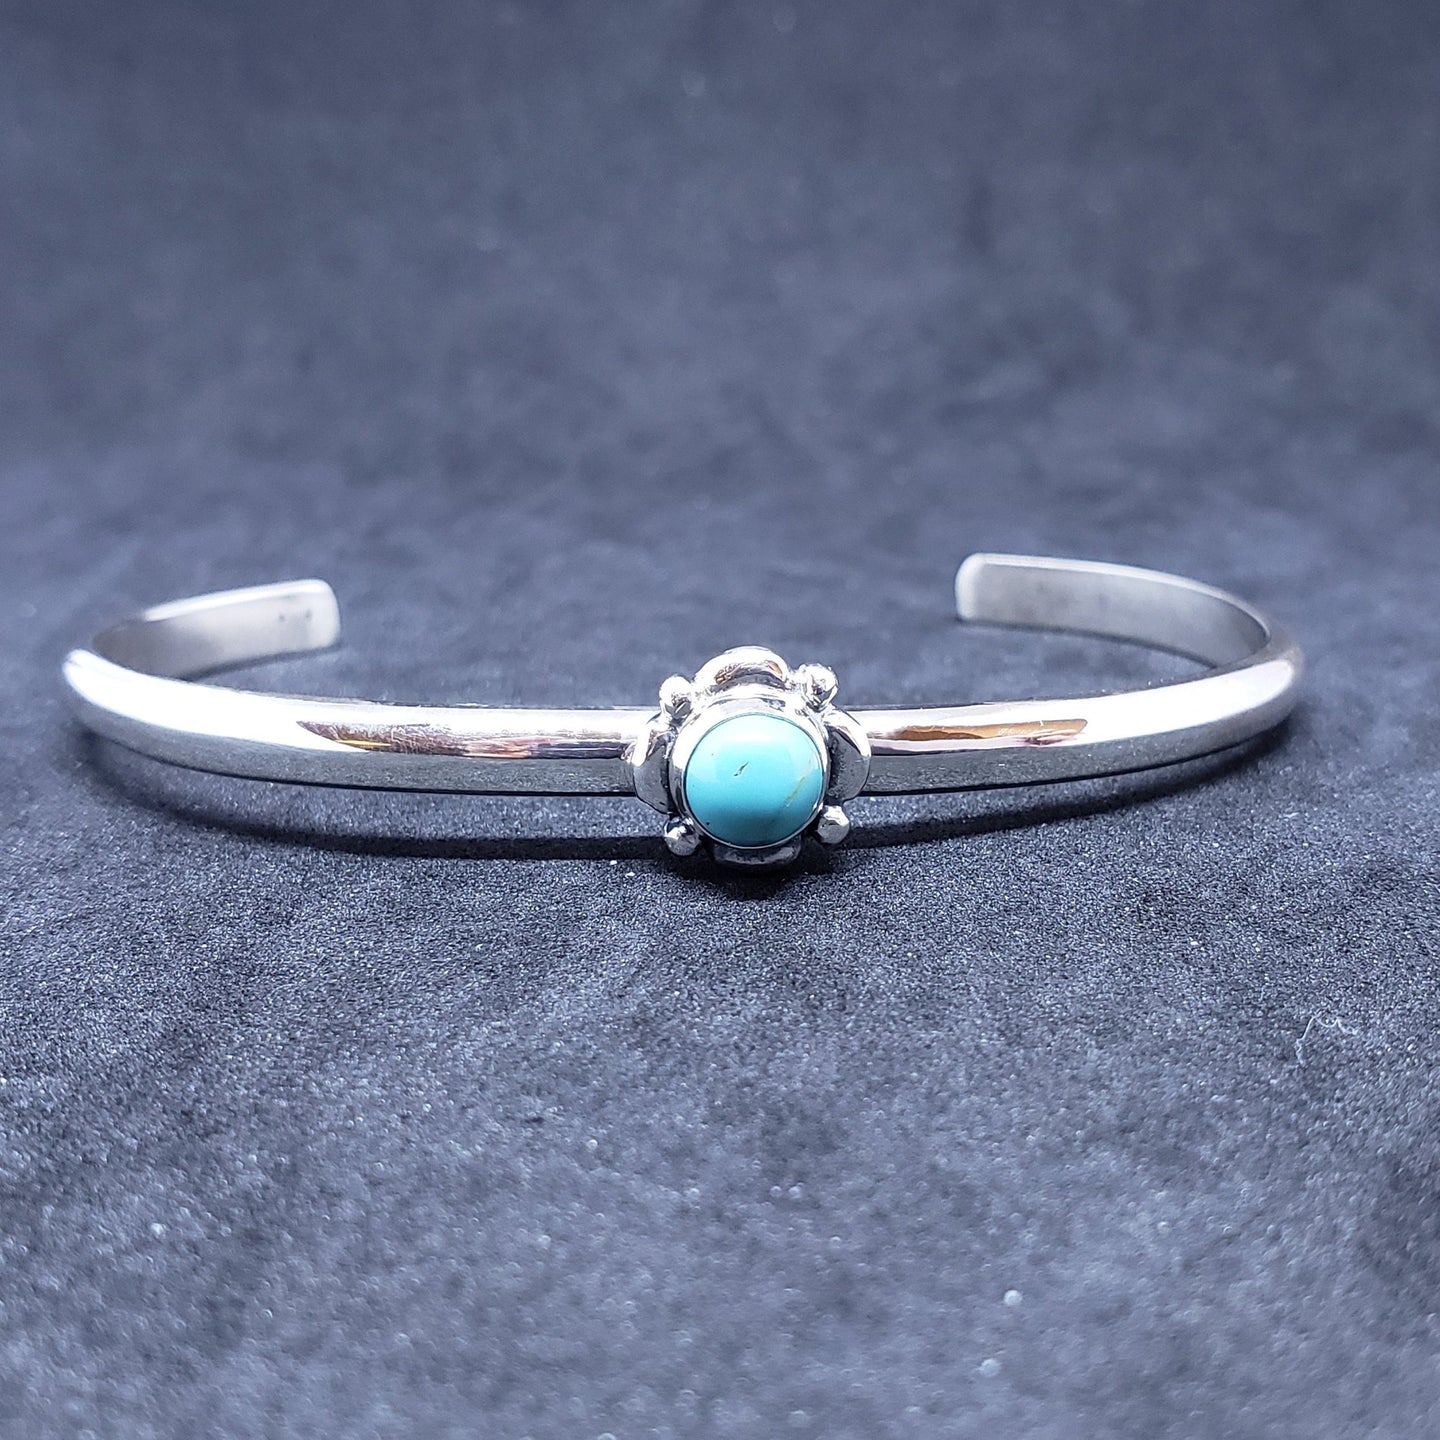 New Navajo small clover flower design with dots kingman turquoise sterling silver cuff bracelet